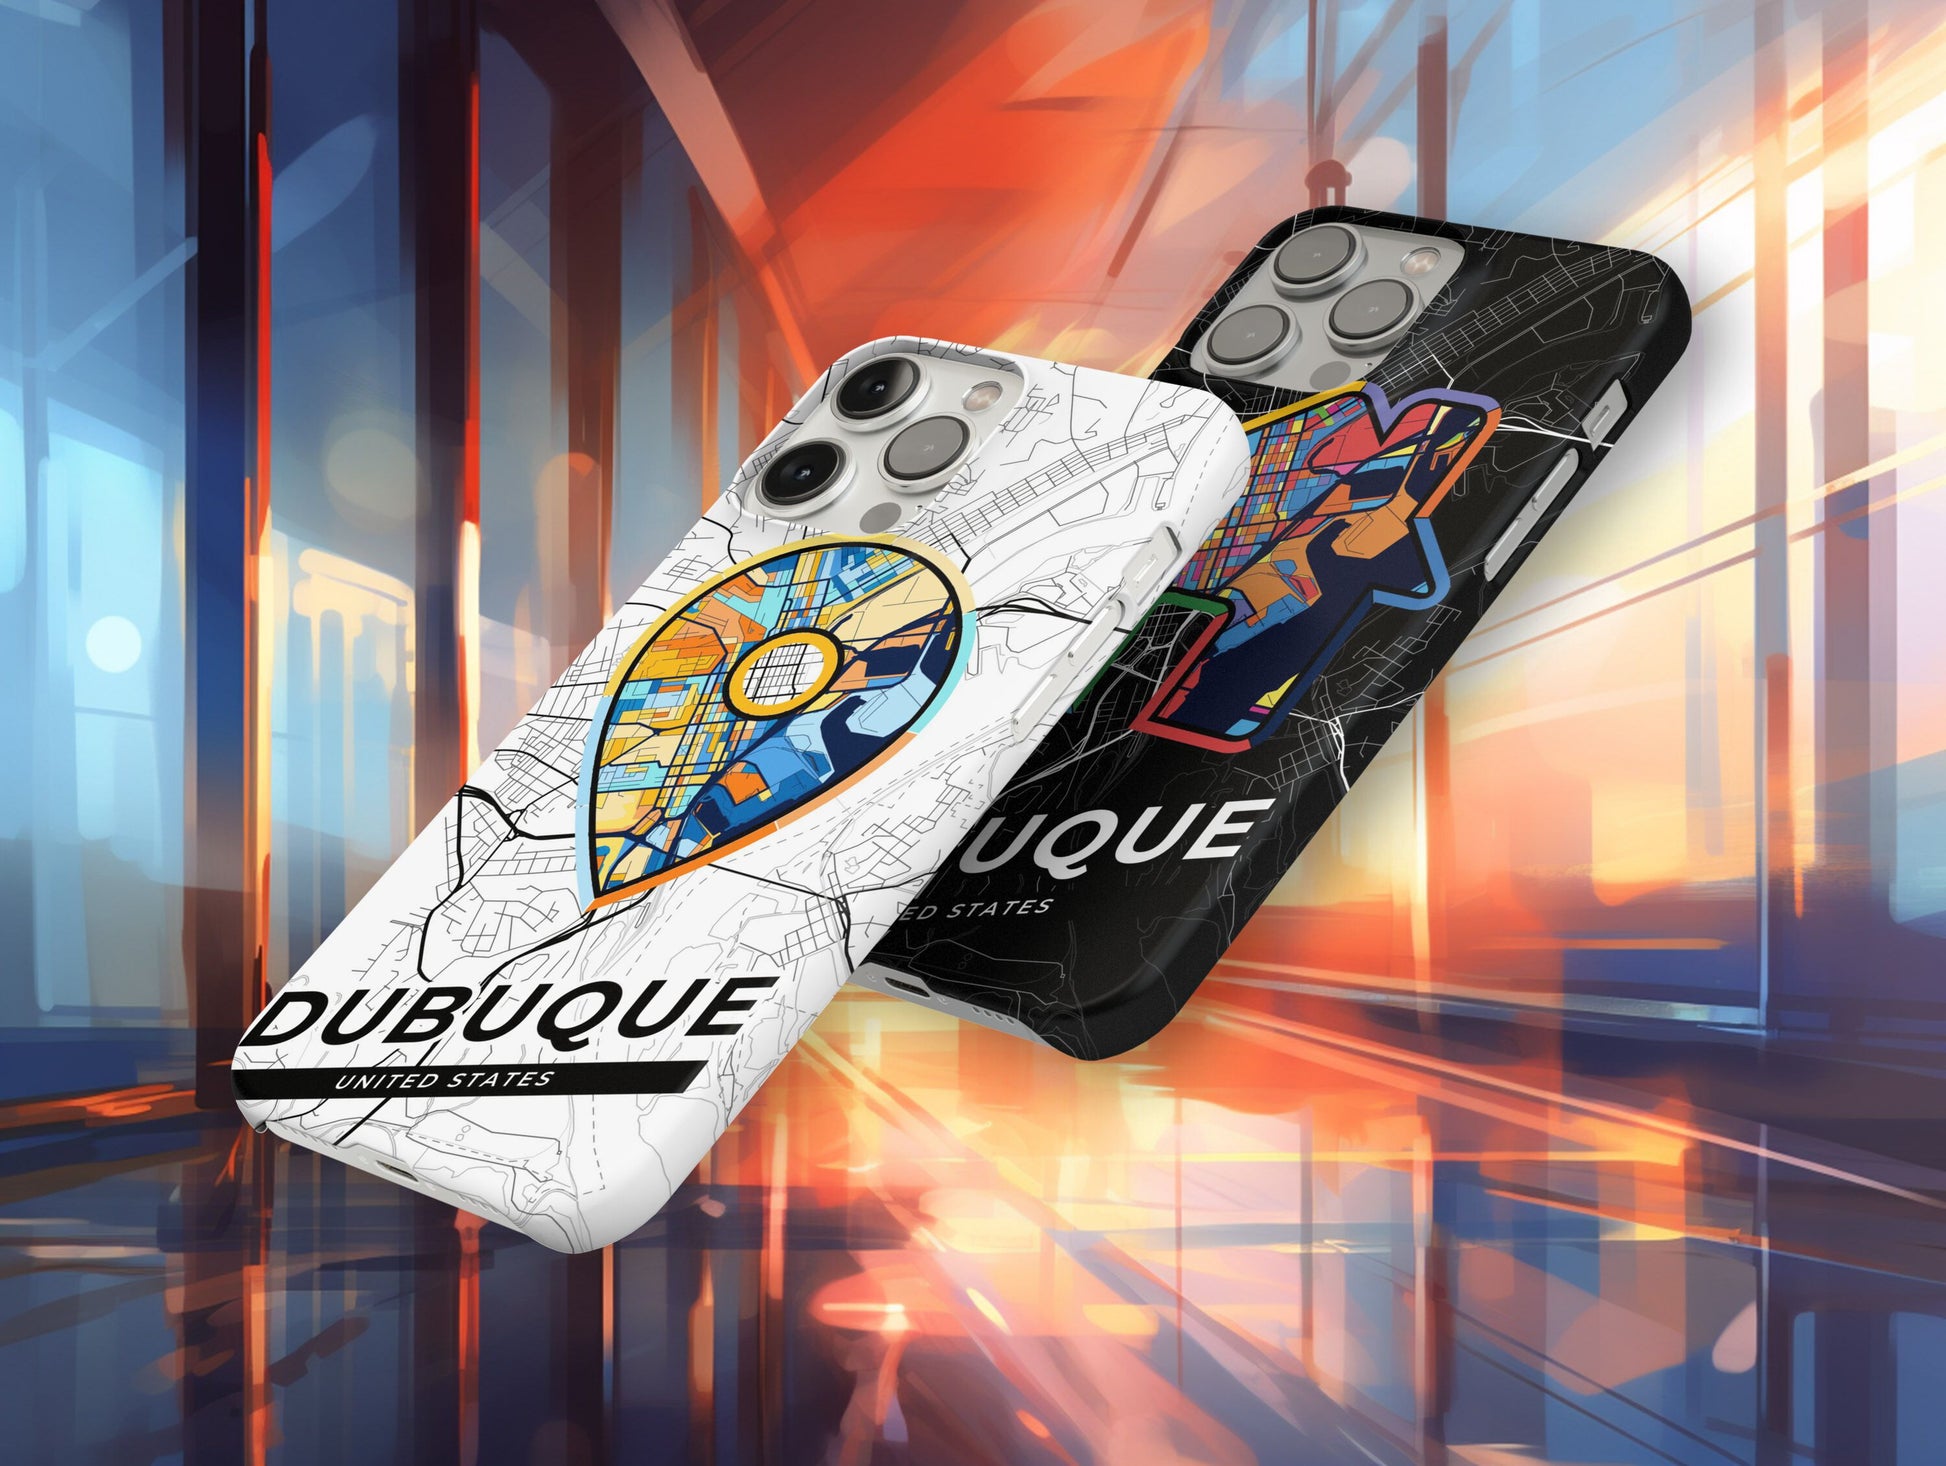 Dubuque Iowa slim phone case with colorful icon. Birthday, wedding or housewarming gift. Couple match cases.